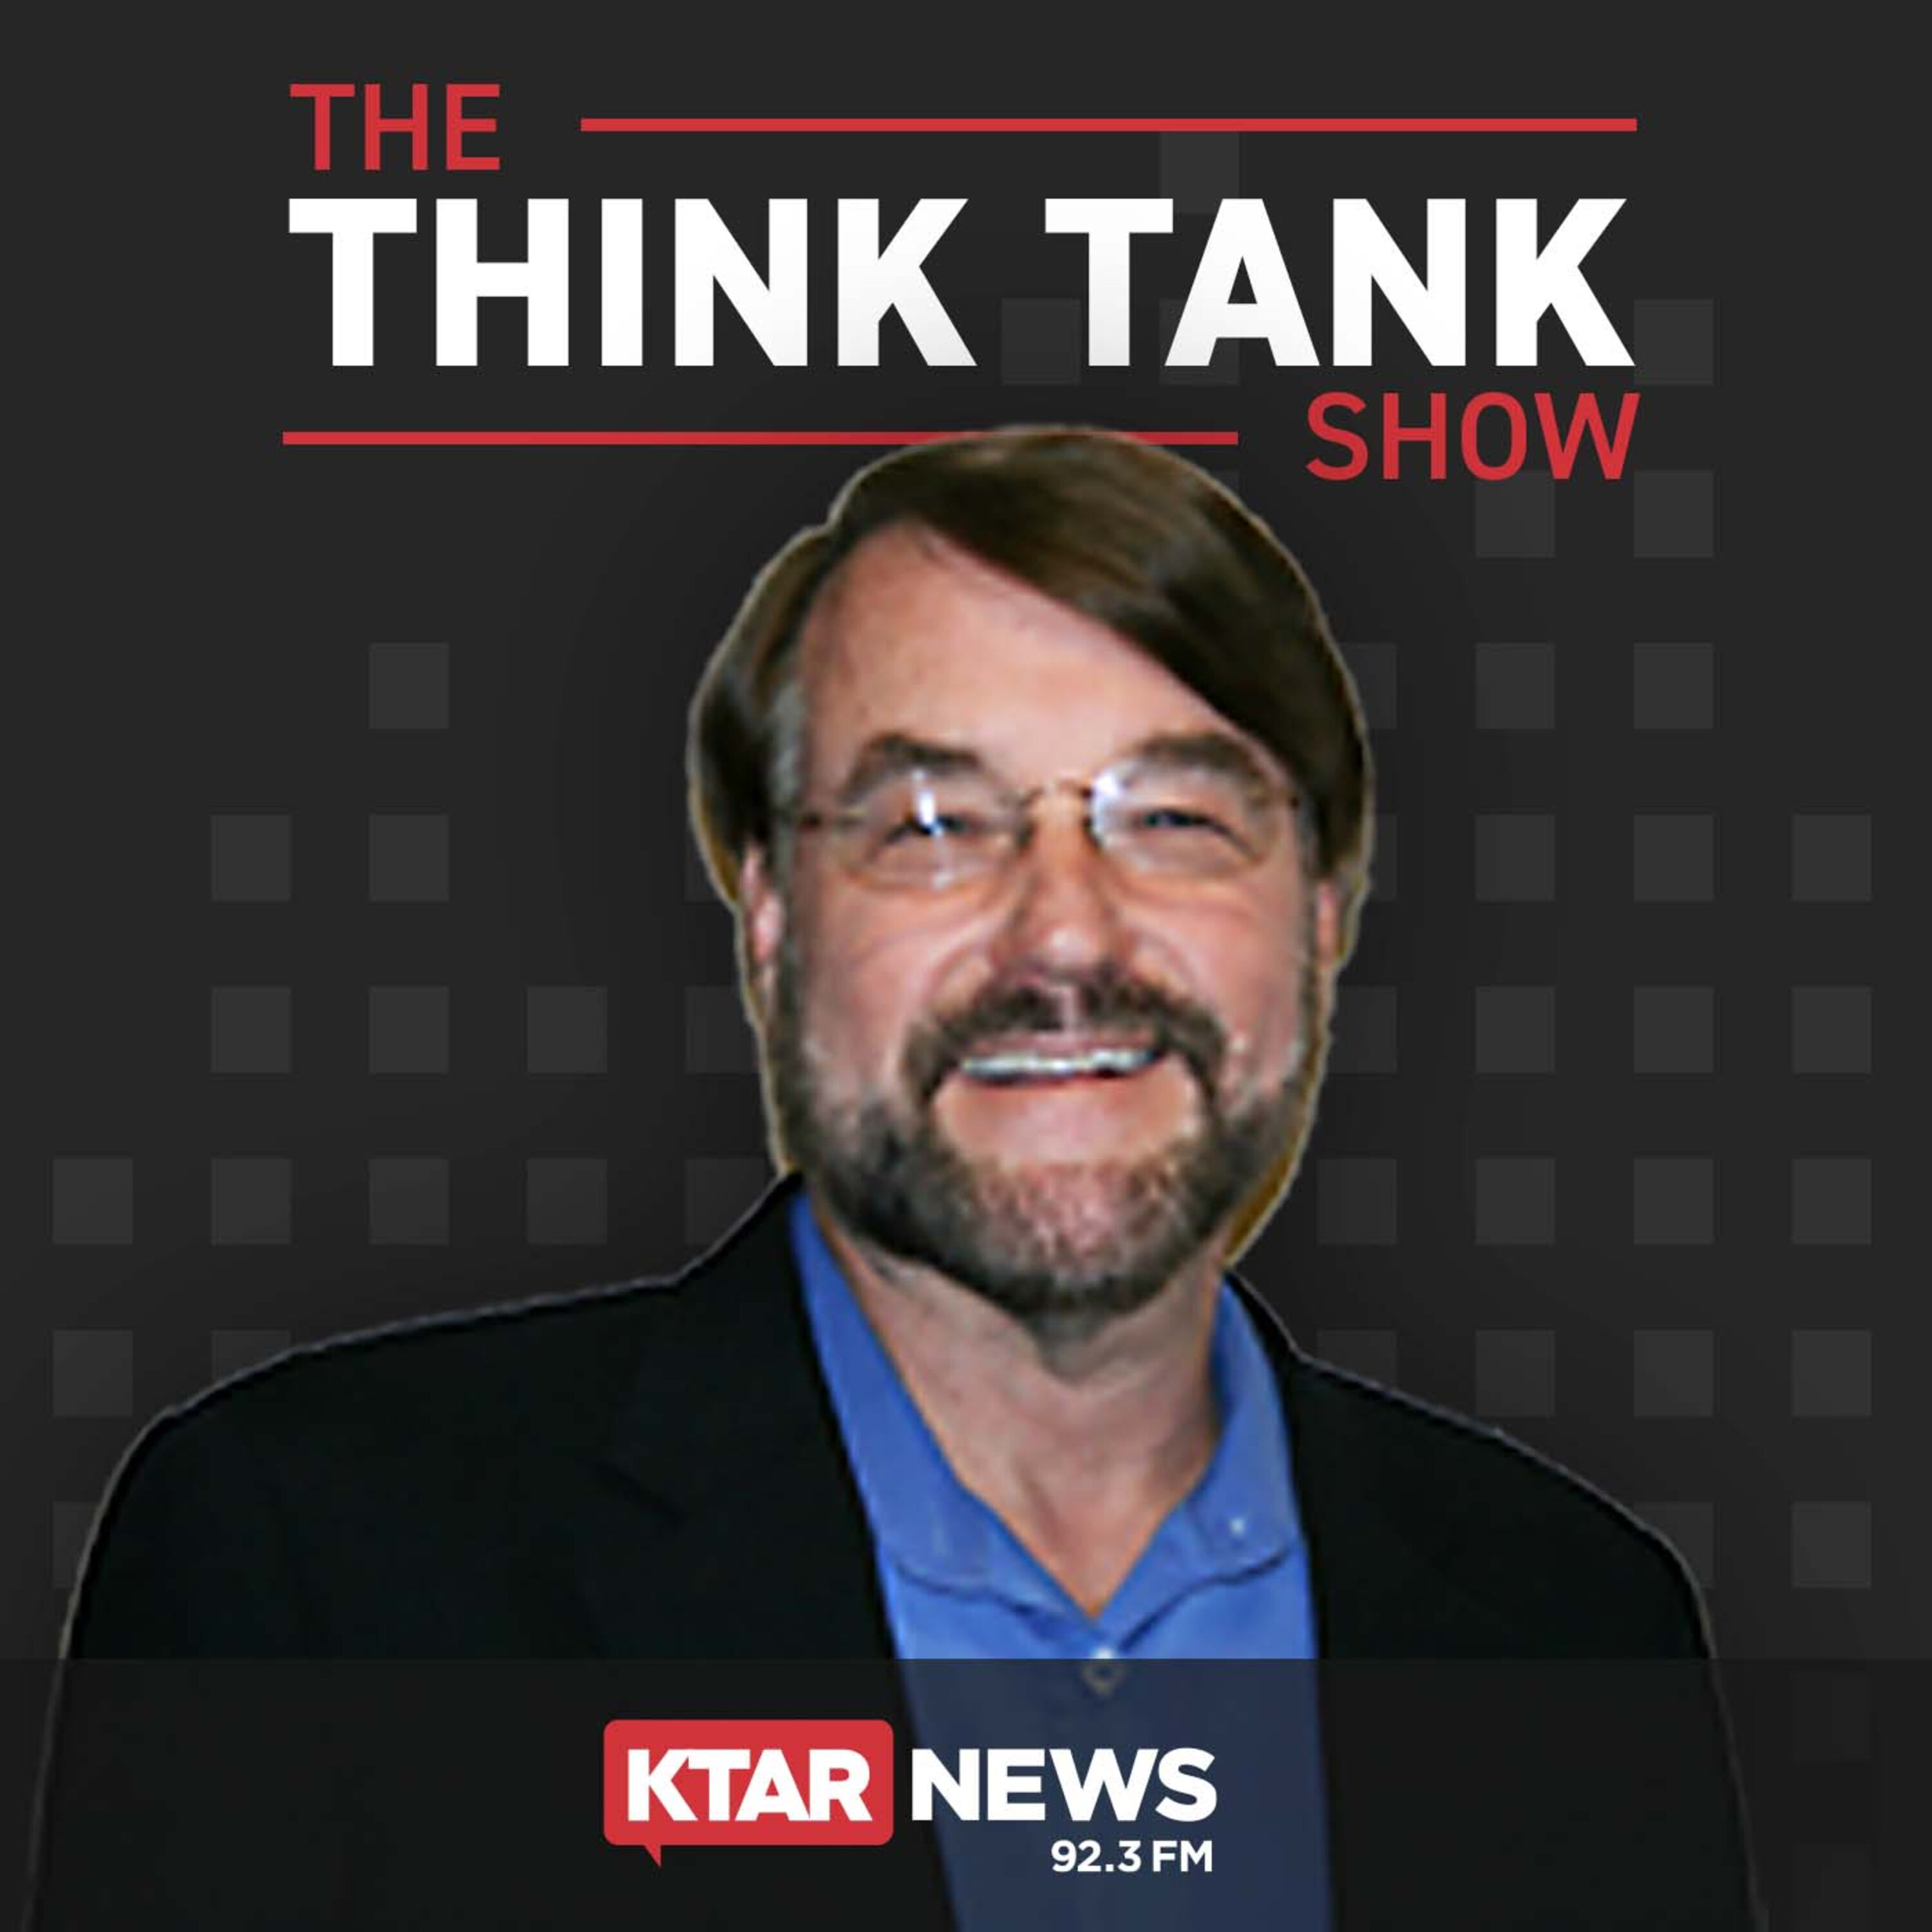 THINK TANK 1-22-22 - Politics with Barry Markson